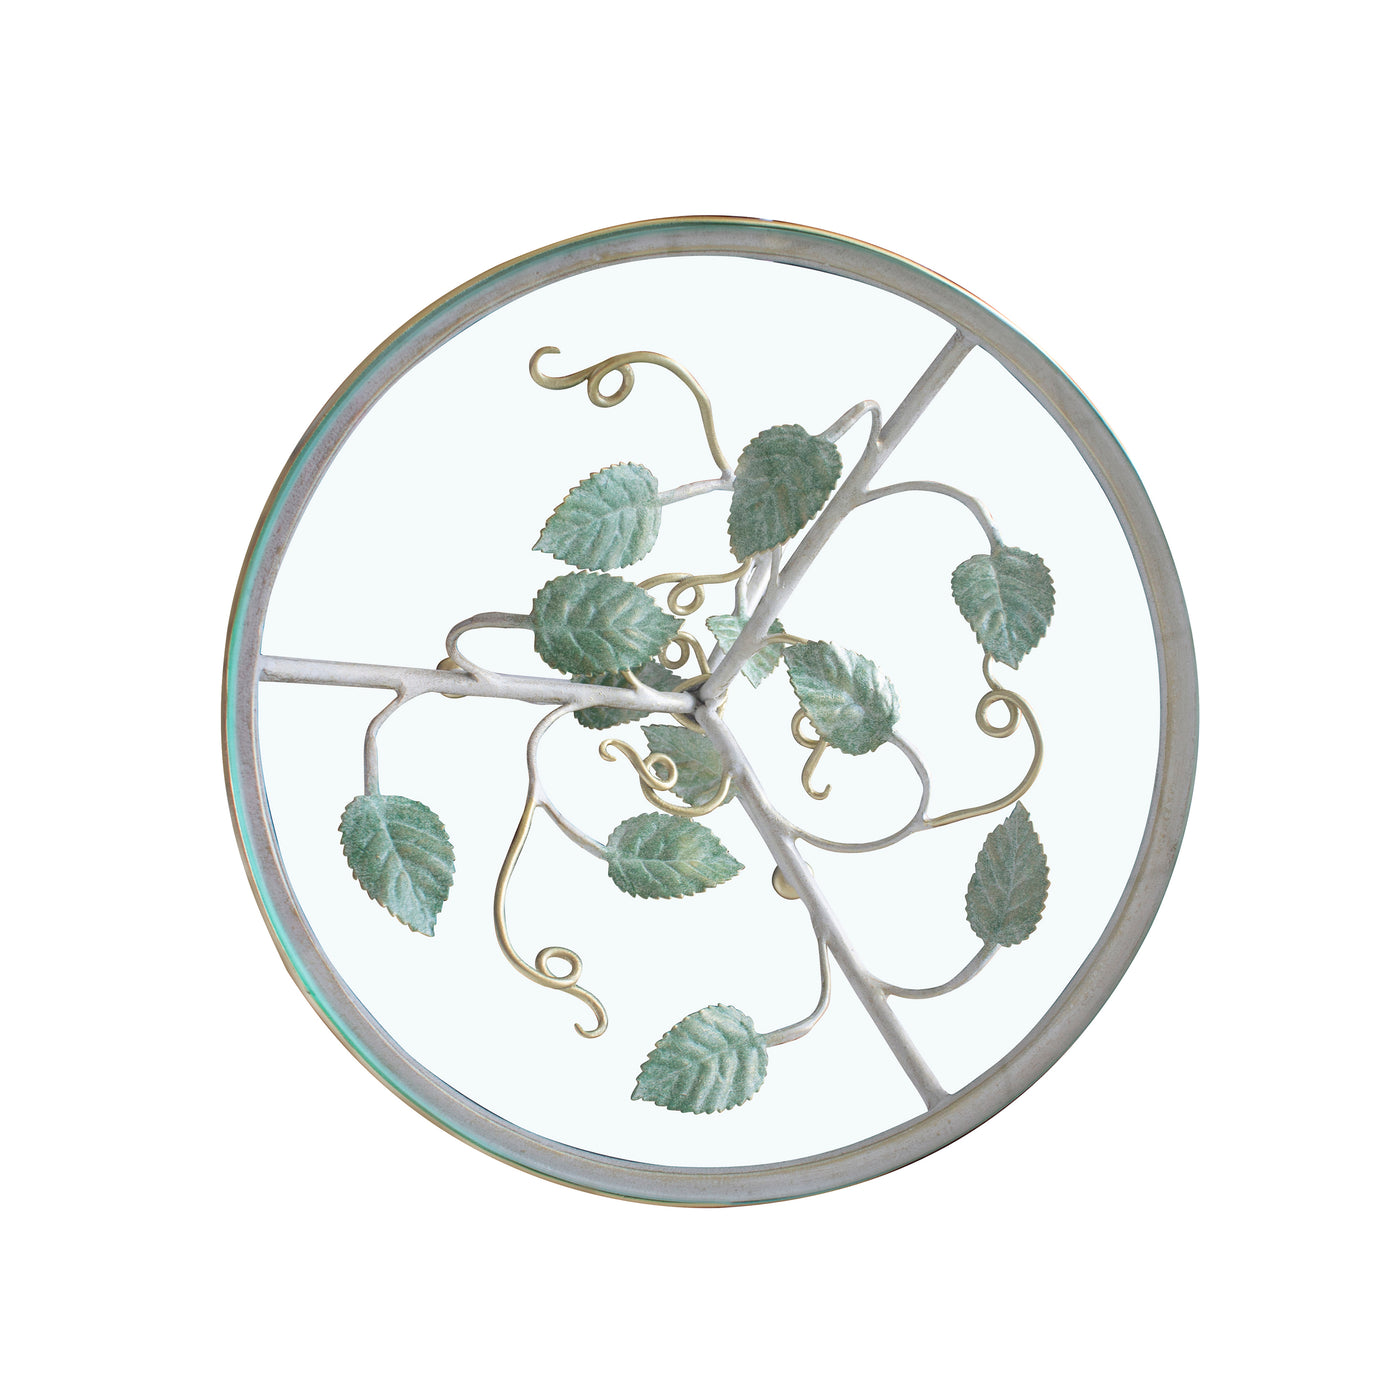 Top view of a round decorative cake plate inspired by leaves and branches; topped with a clear round glass